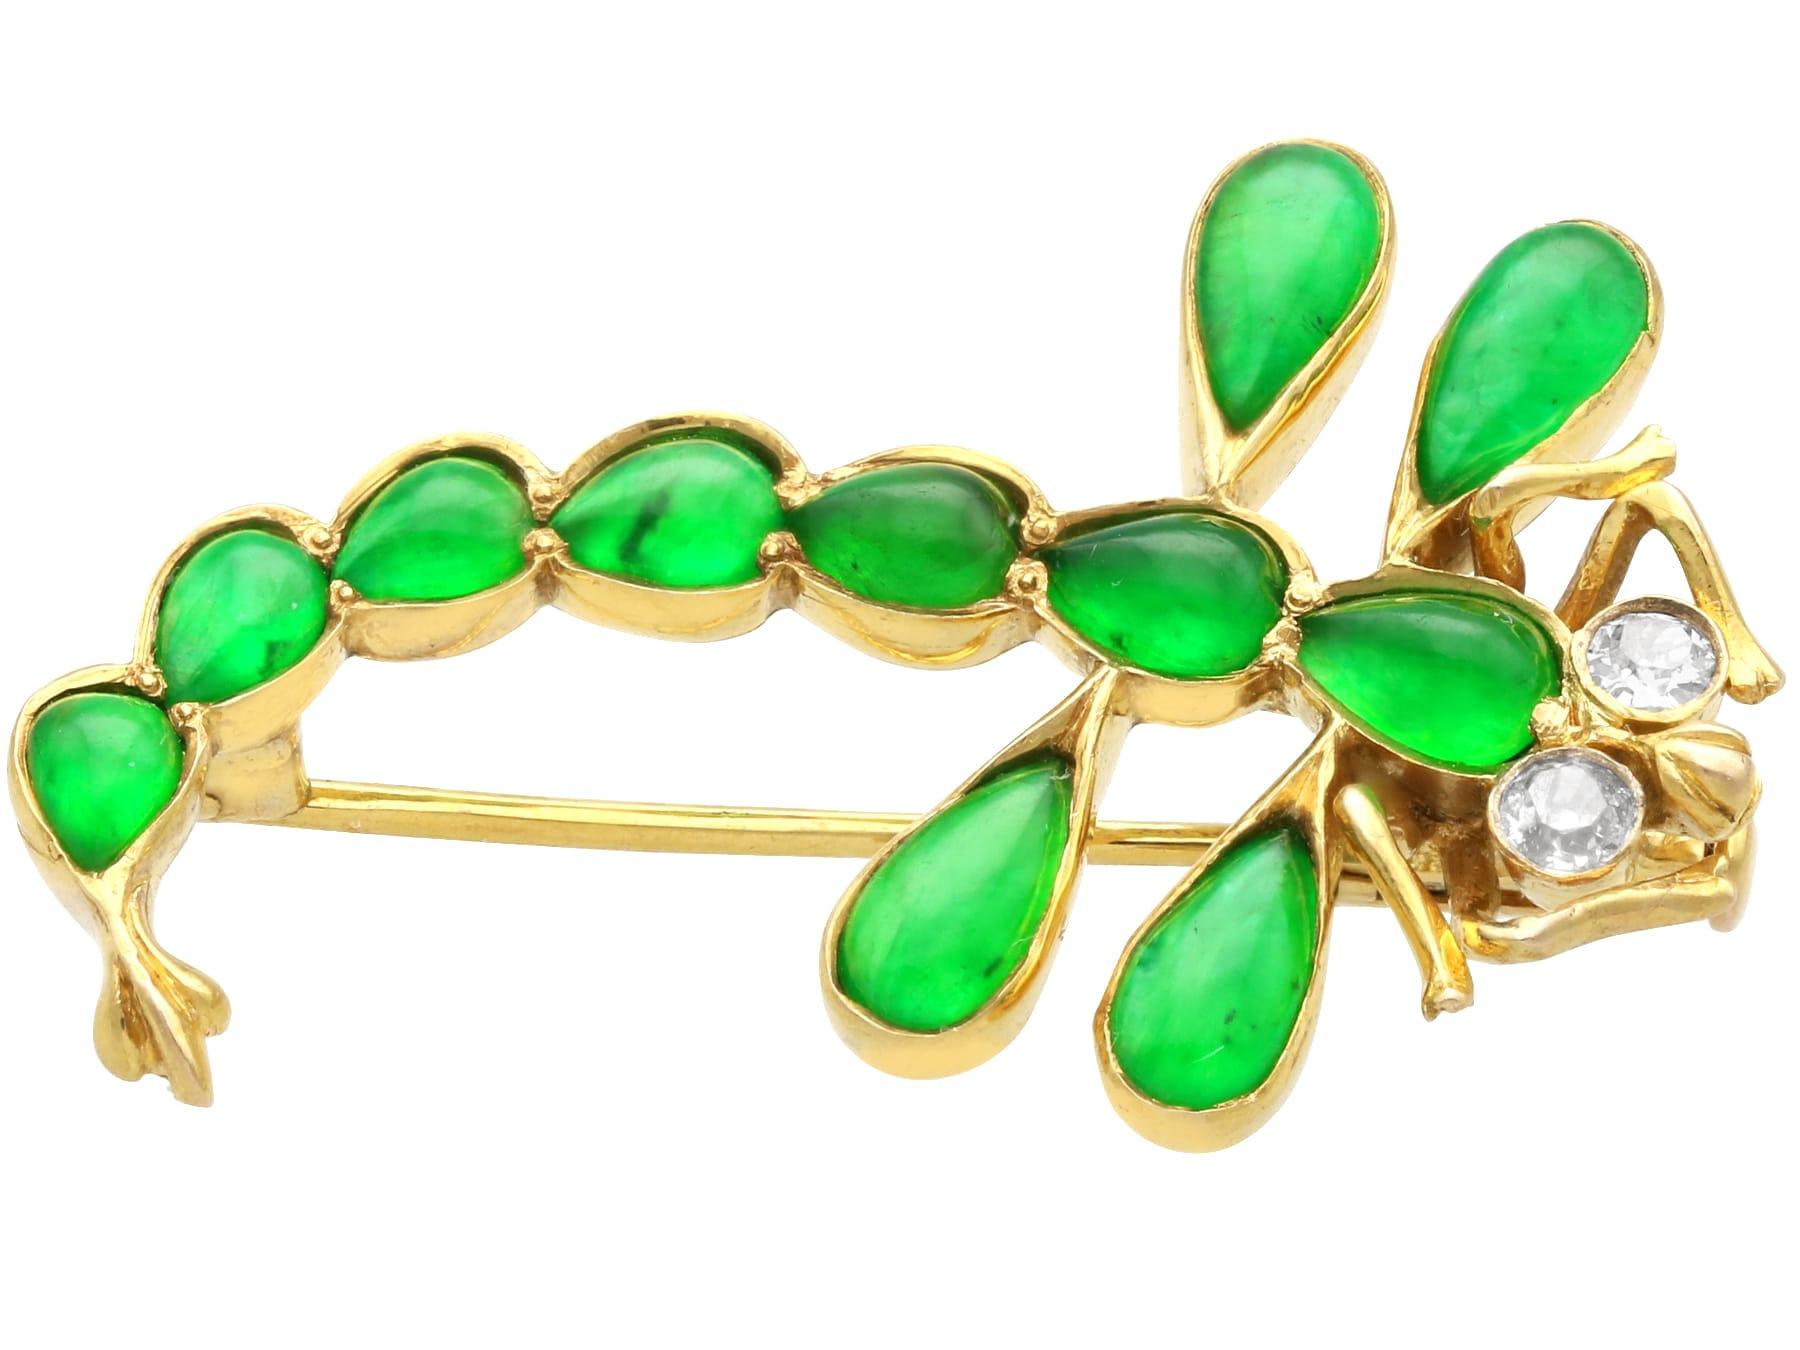 Antique 1.95Ct Chrysoprase and 0.14Ct Diamond 15k Yellow Gold Dragonfly Brooch In Excellent Condition For Sale In Jesmond, Newcastle Upon Tyne